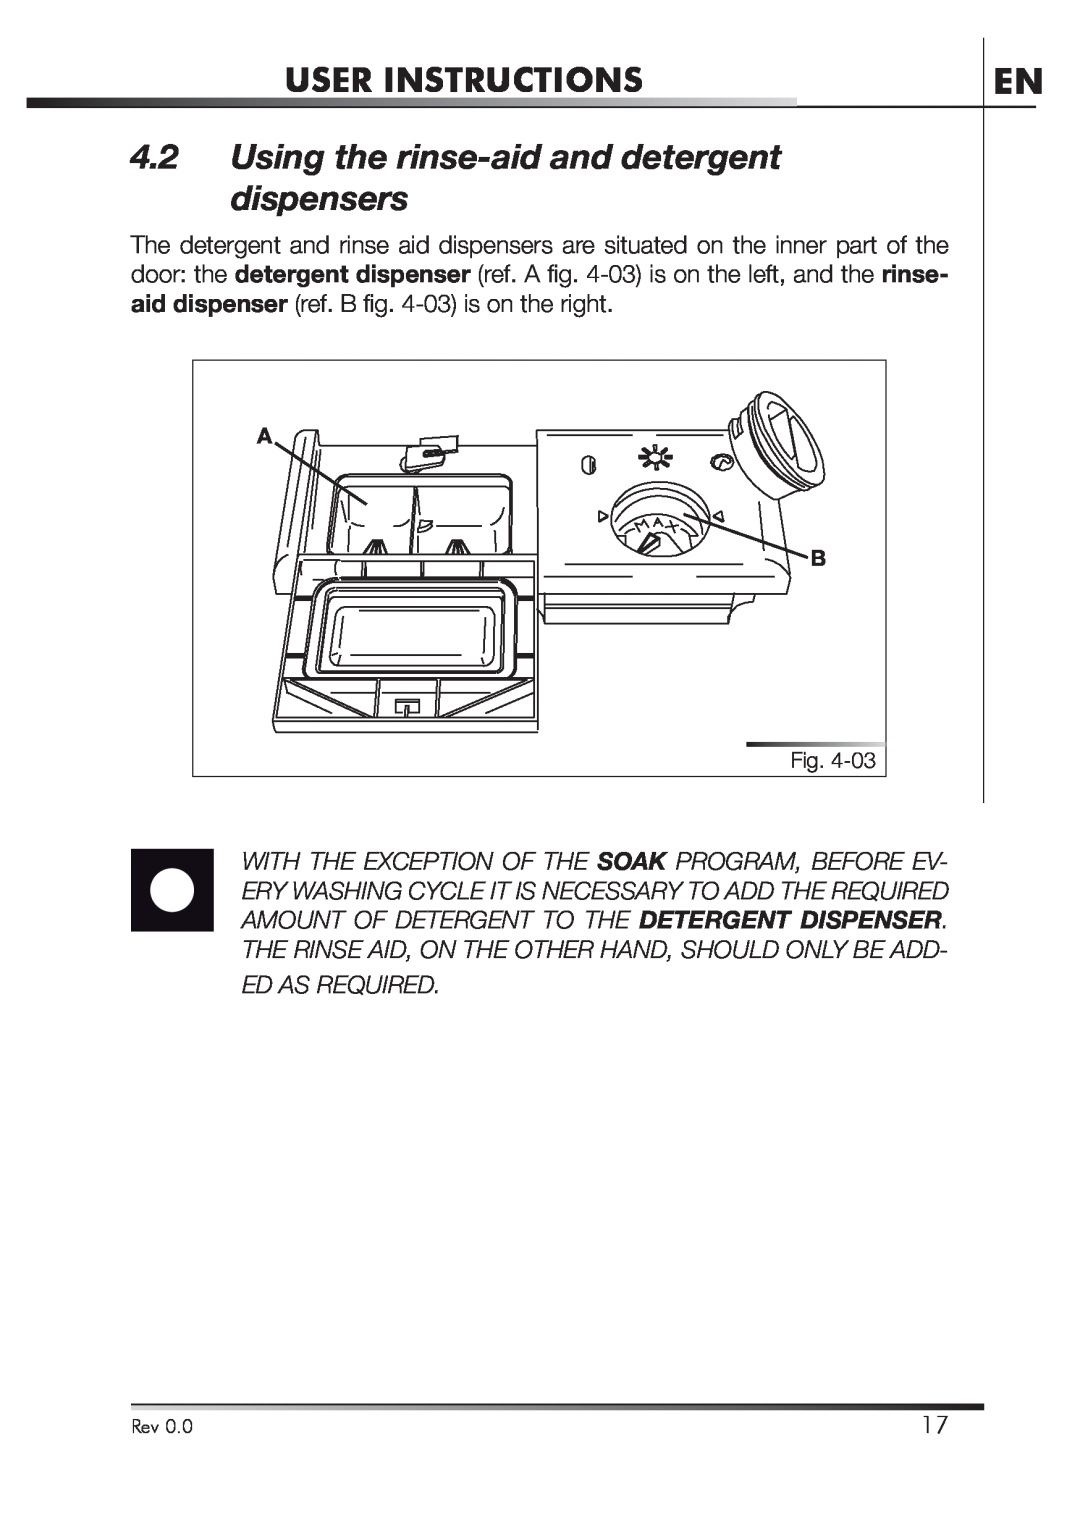 Smeg STA4645 instruction manual Using the rinse-aid and detergent dispensers, User Instructions, Ed As Required 